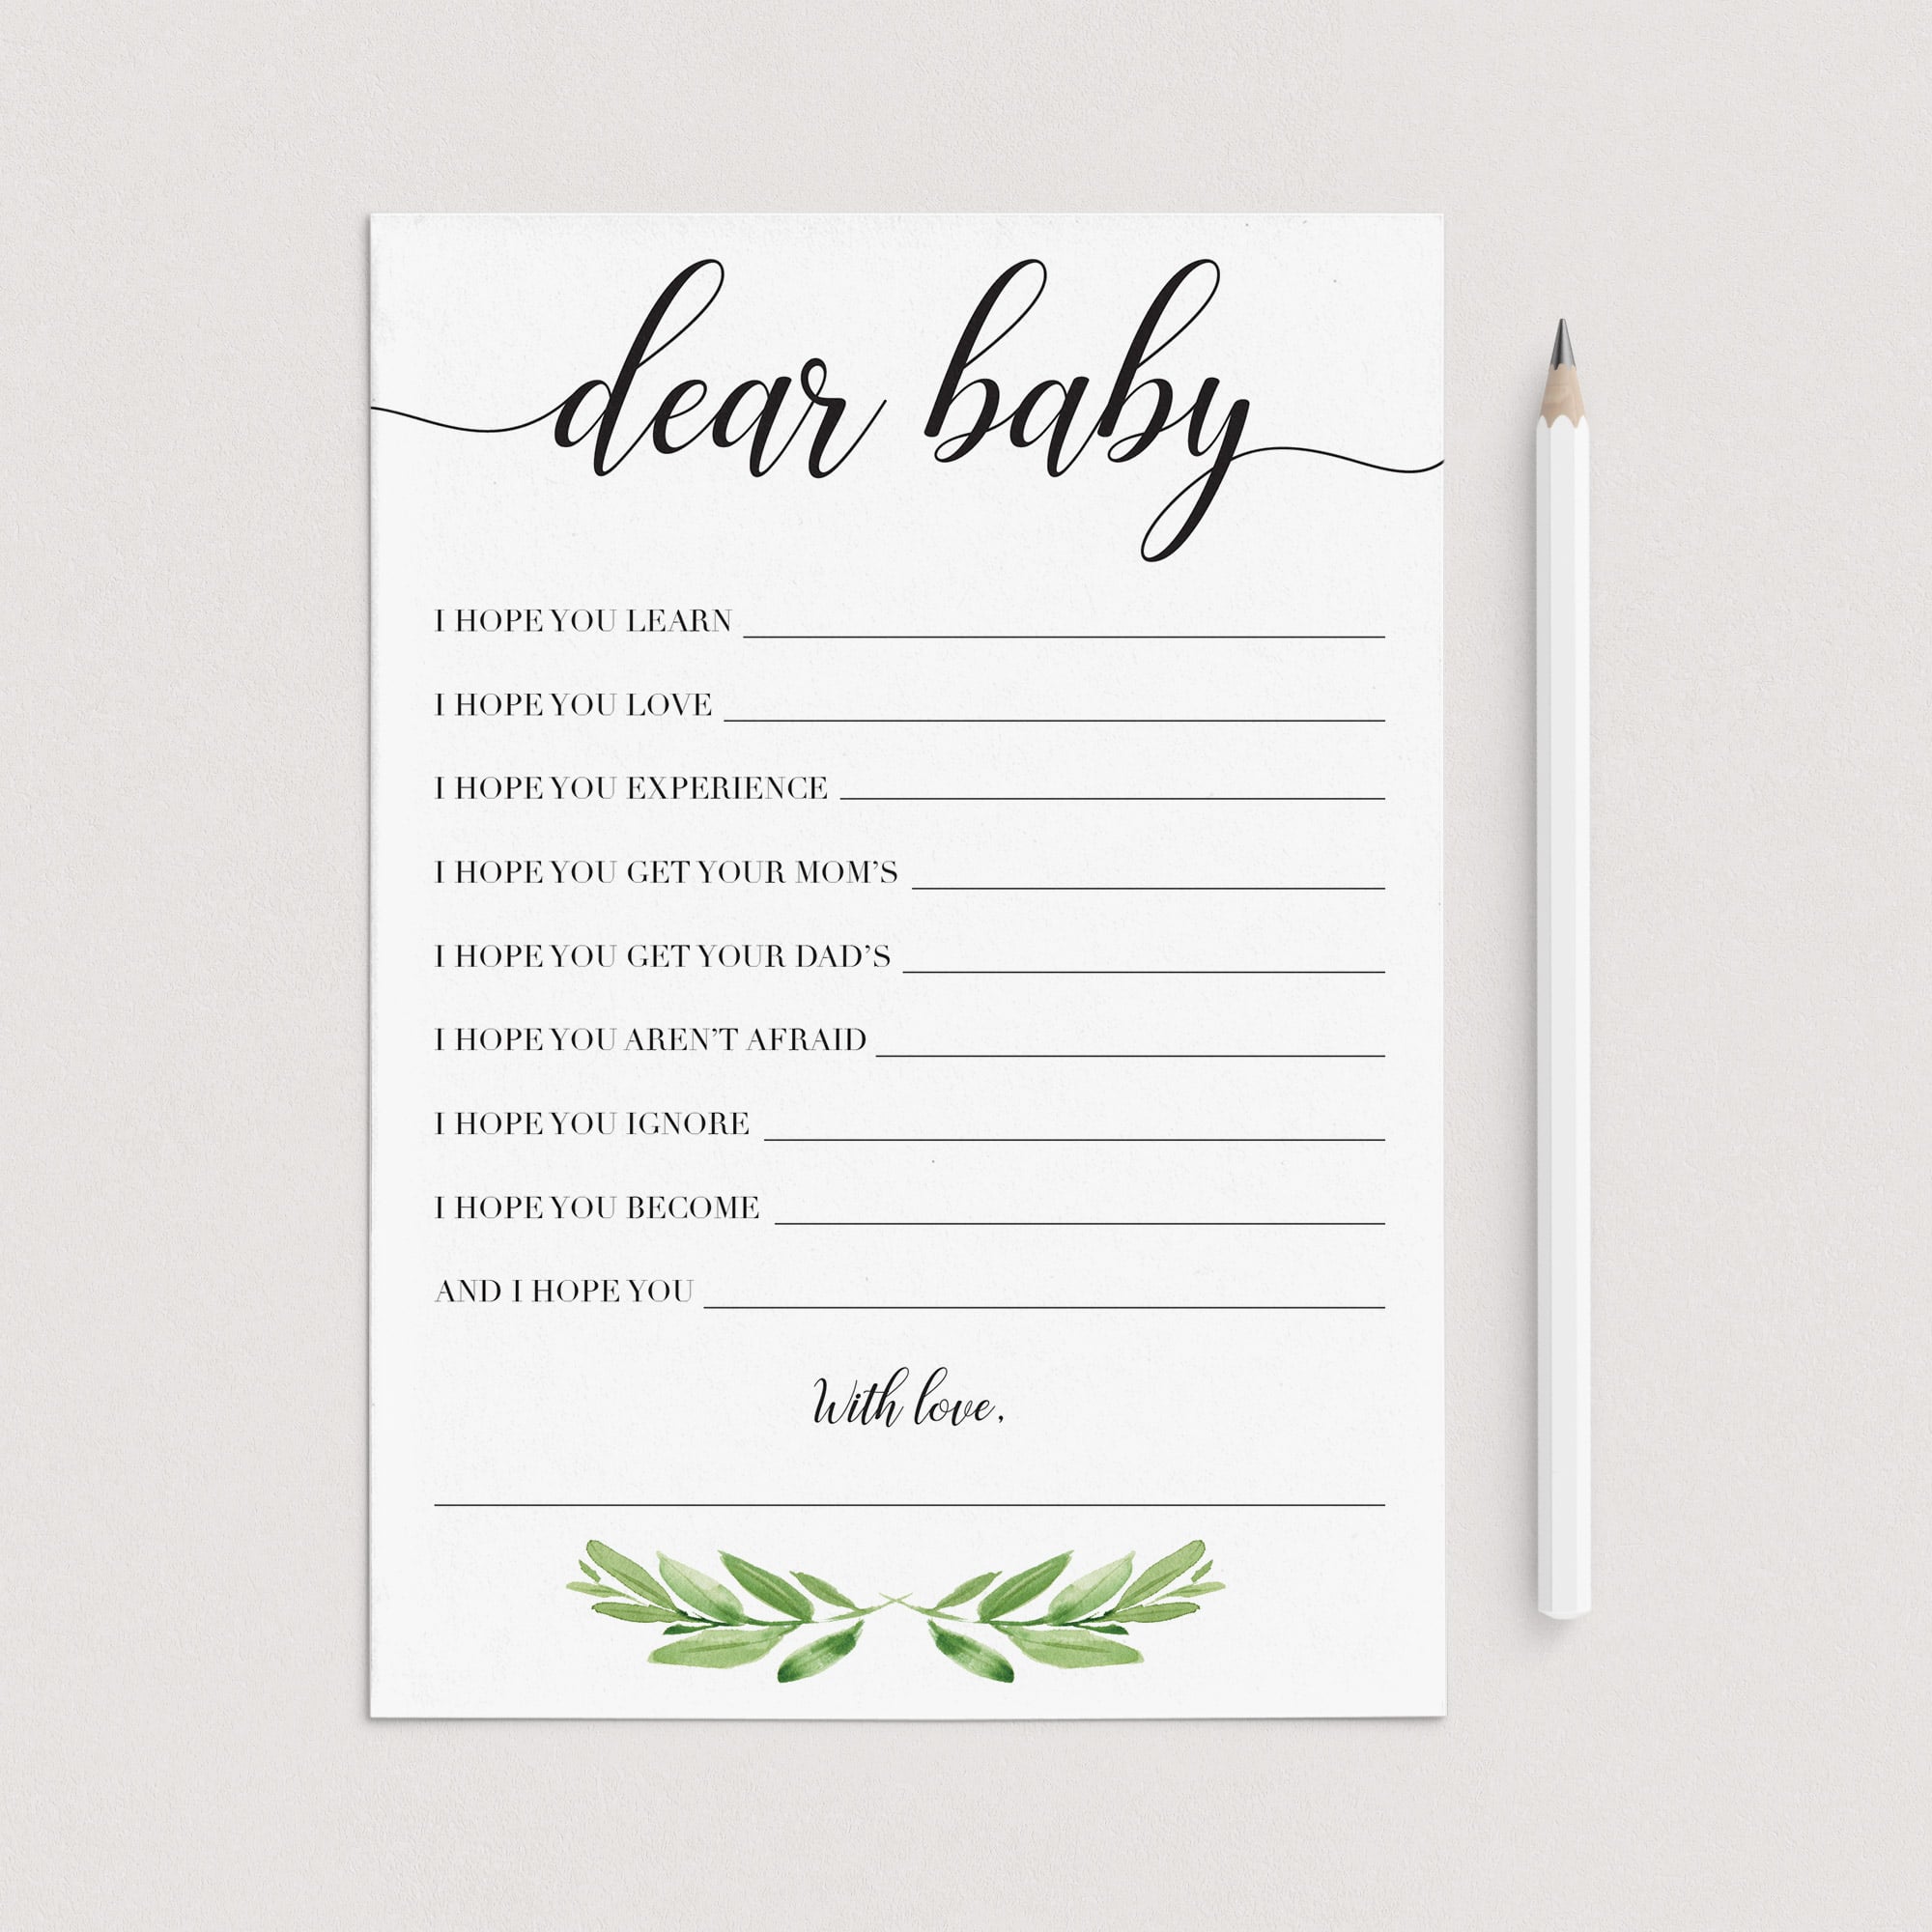 Baby shower keepsakes for mom printable by LittleSizzle